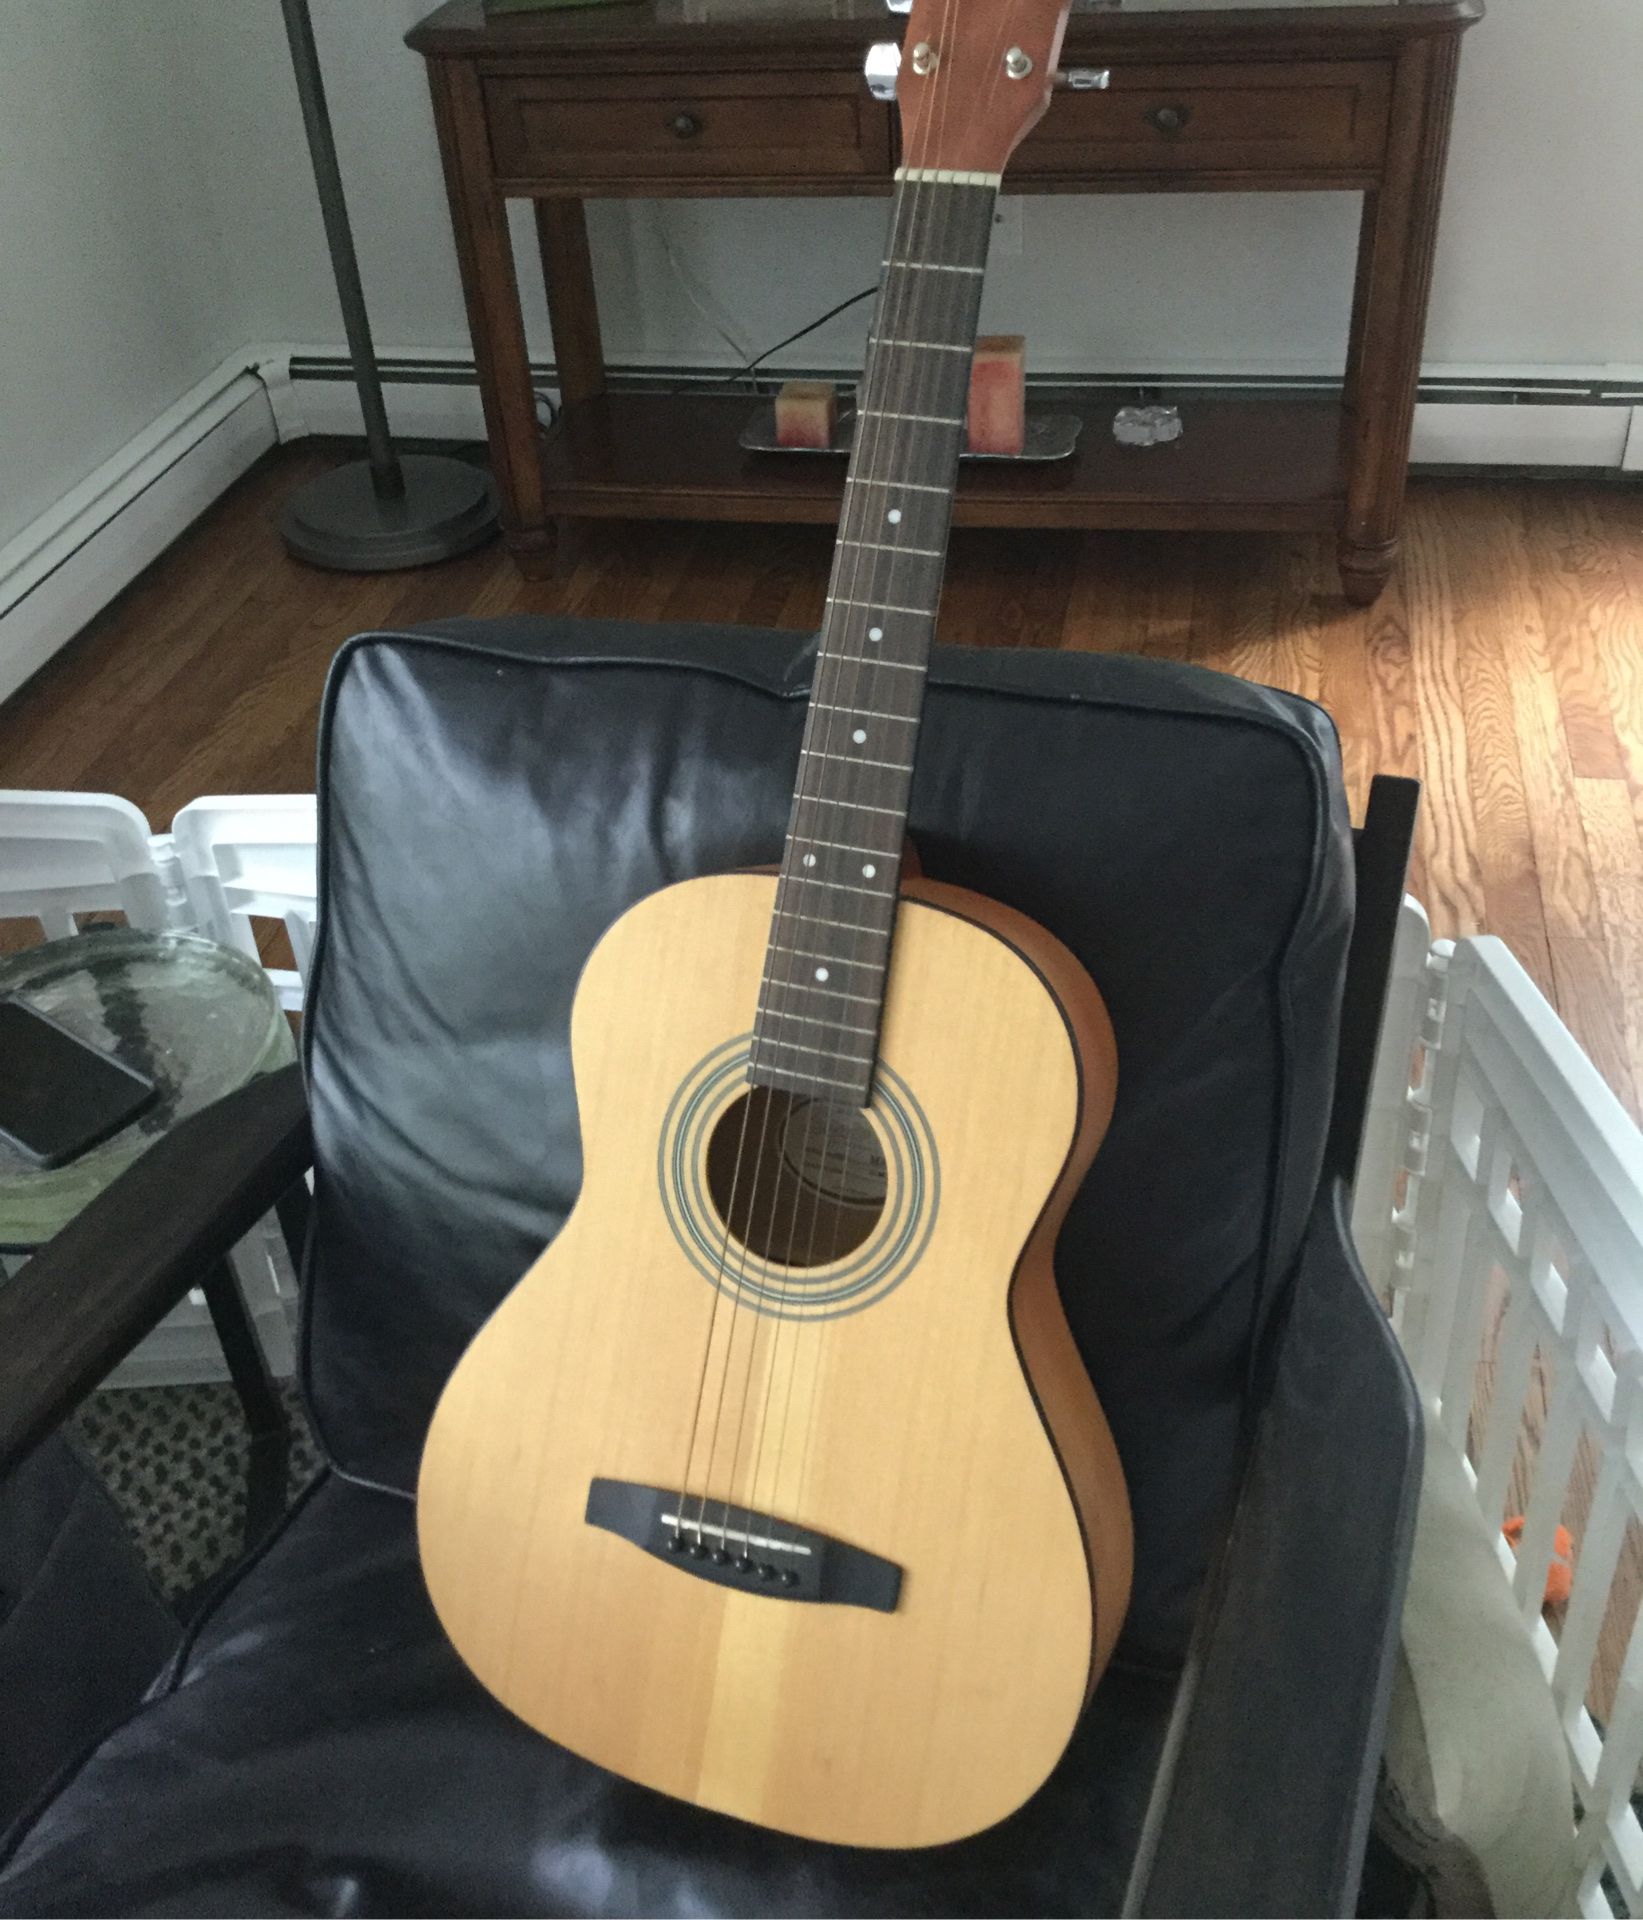 Children’s Guitar with carrying case...perfect condition and ideal for XMas